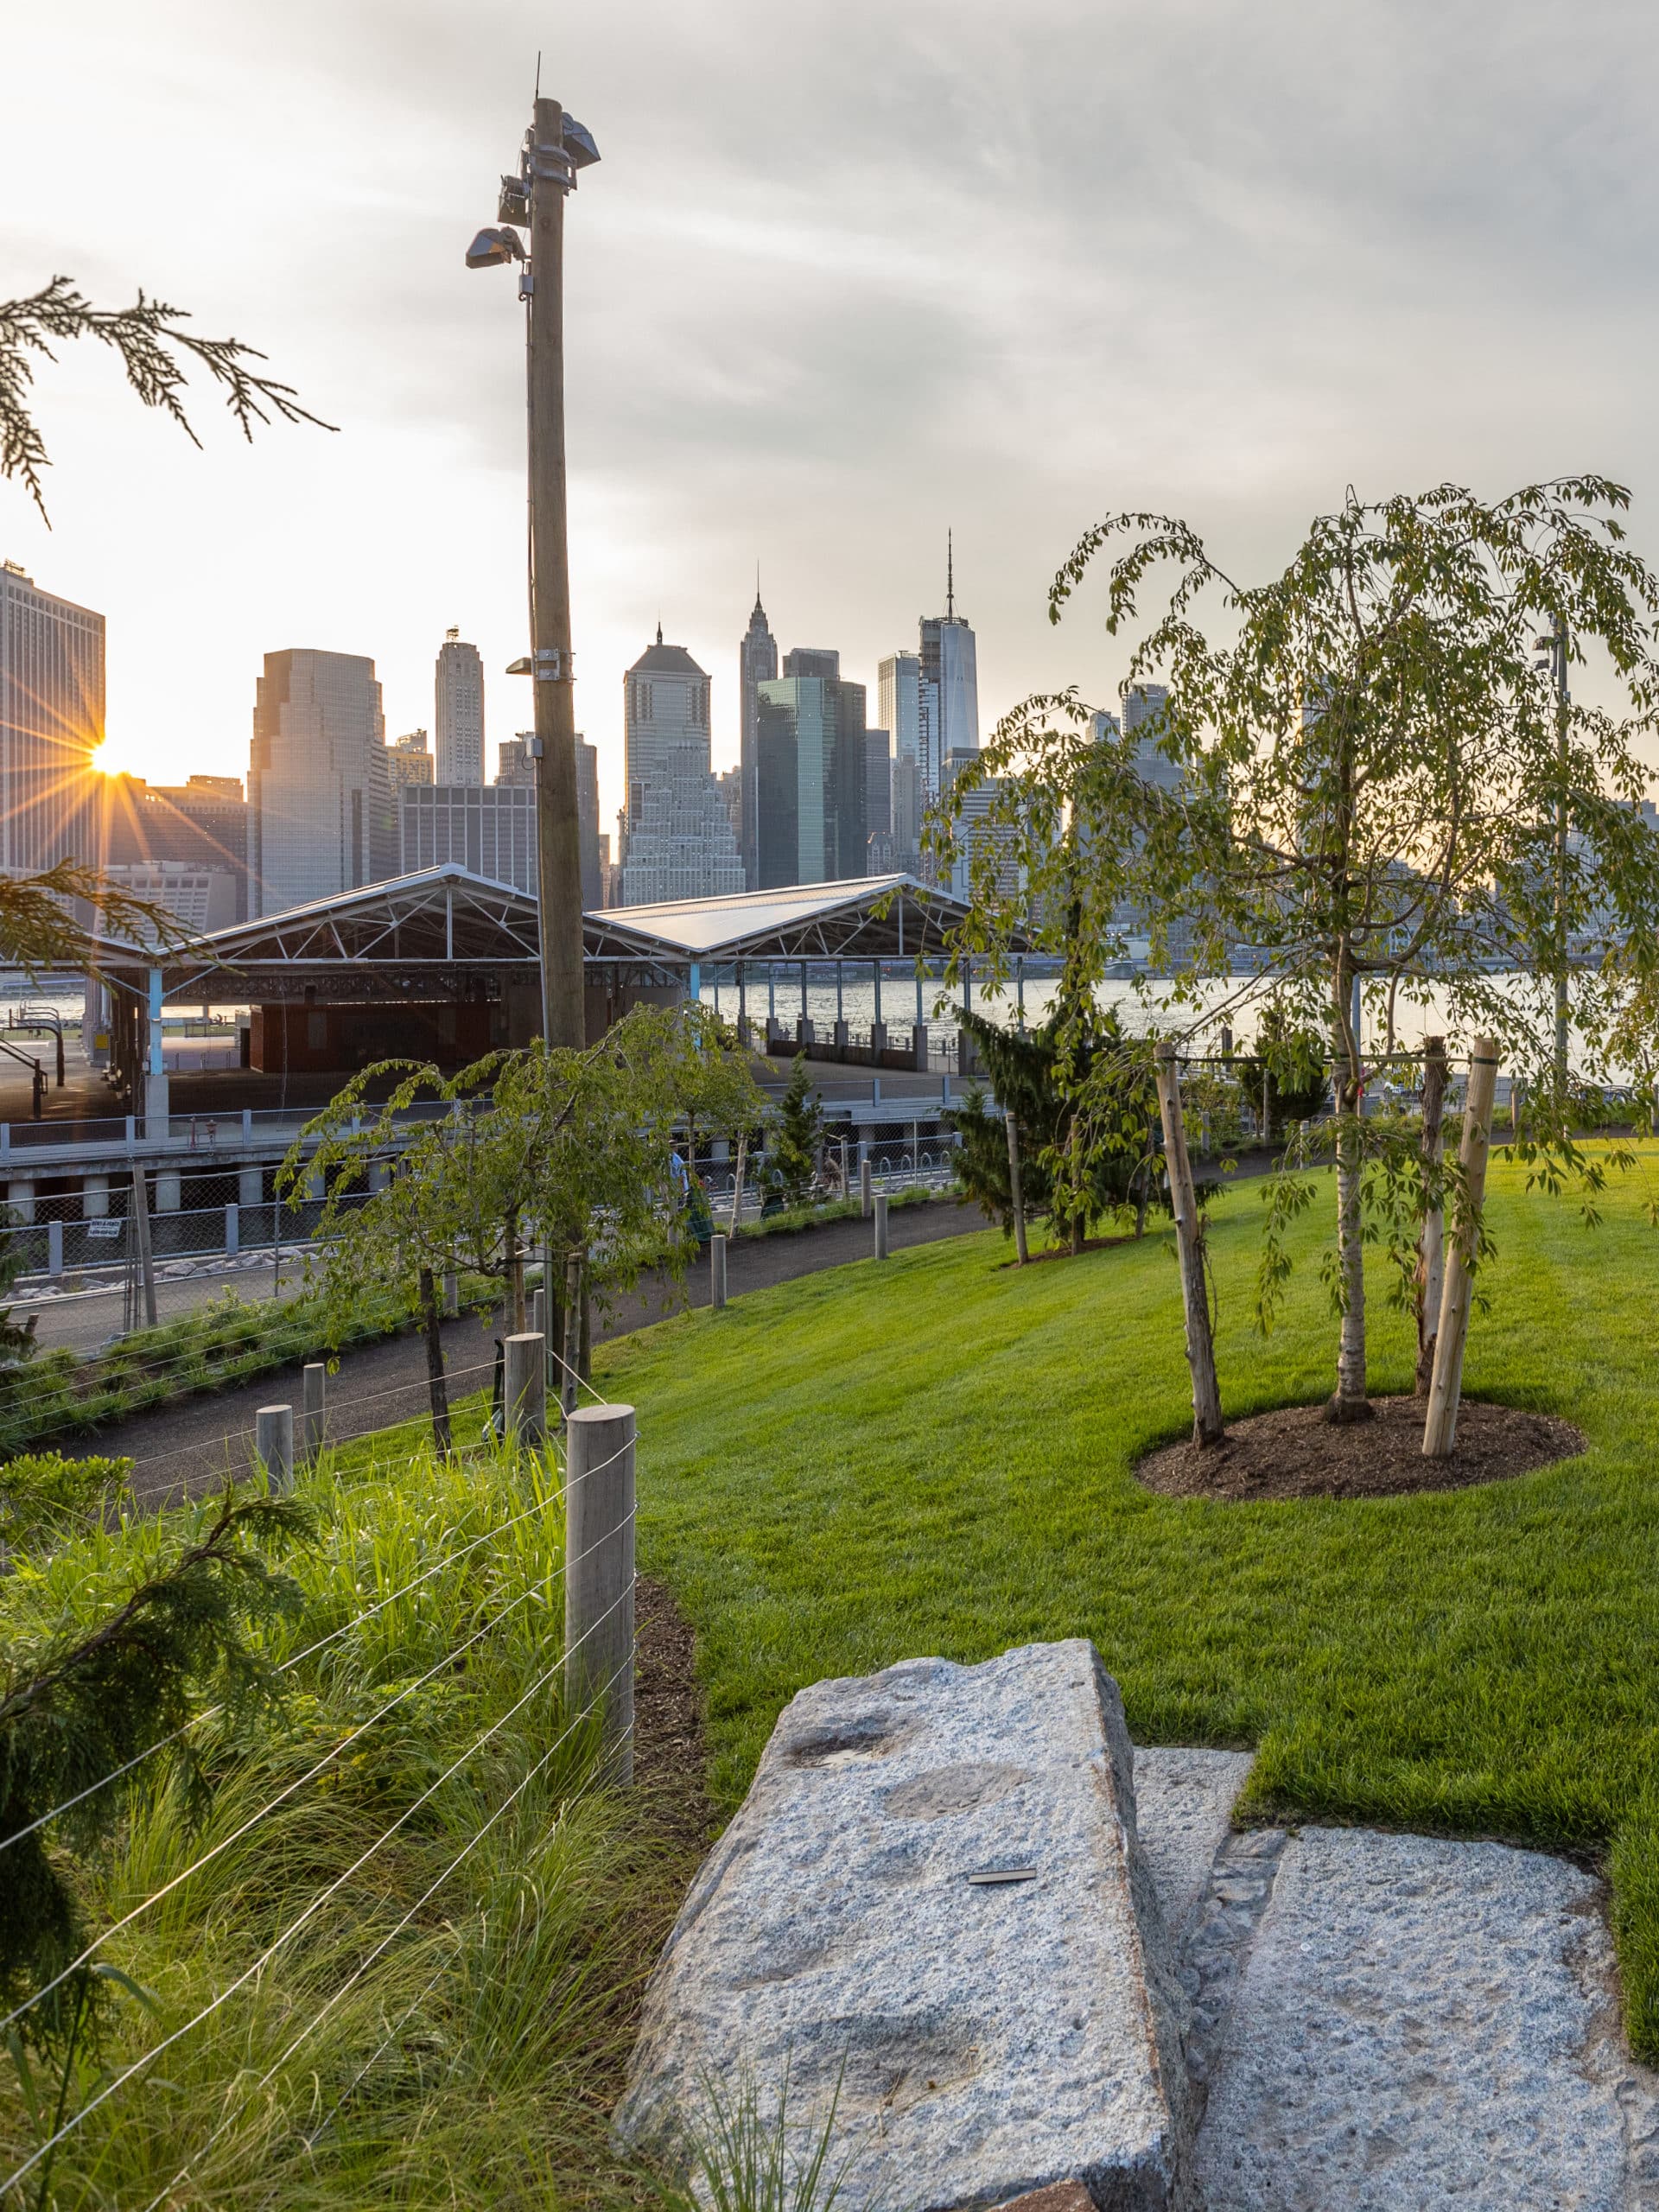 Pier 2 Uplands lawn with view of Pier 2 and lower Manhattan at sunset.